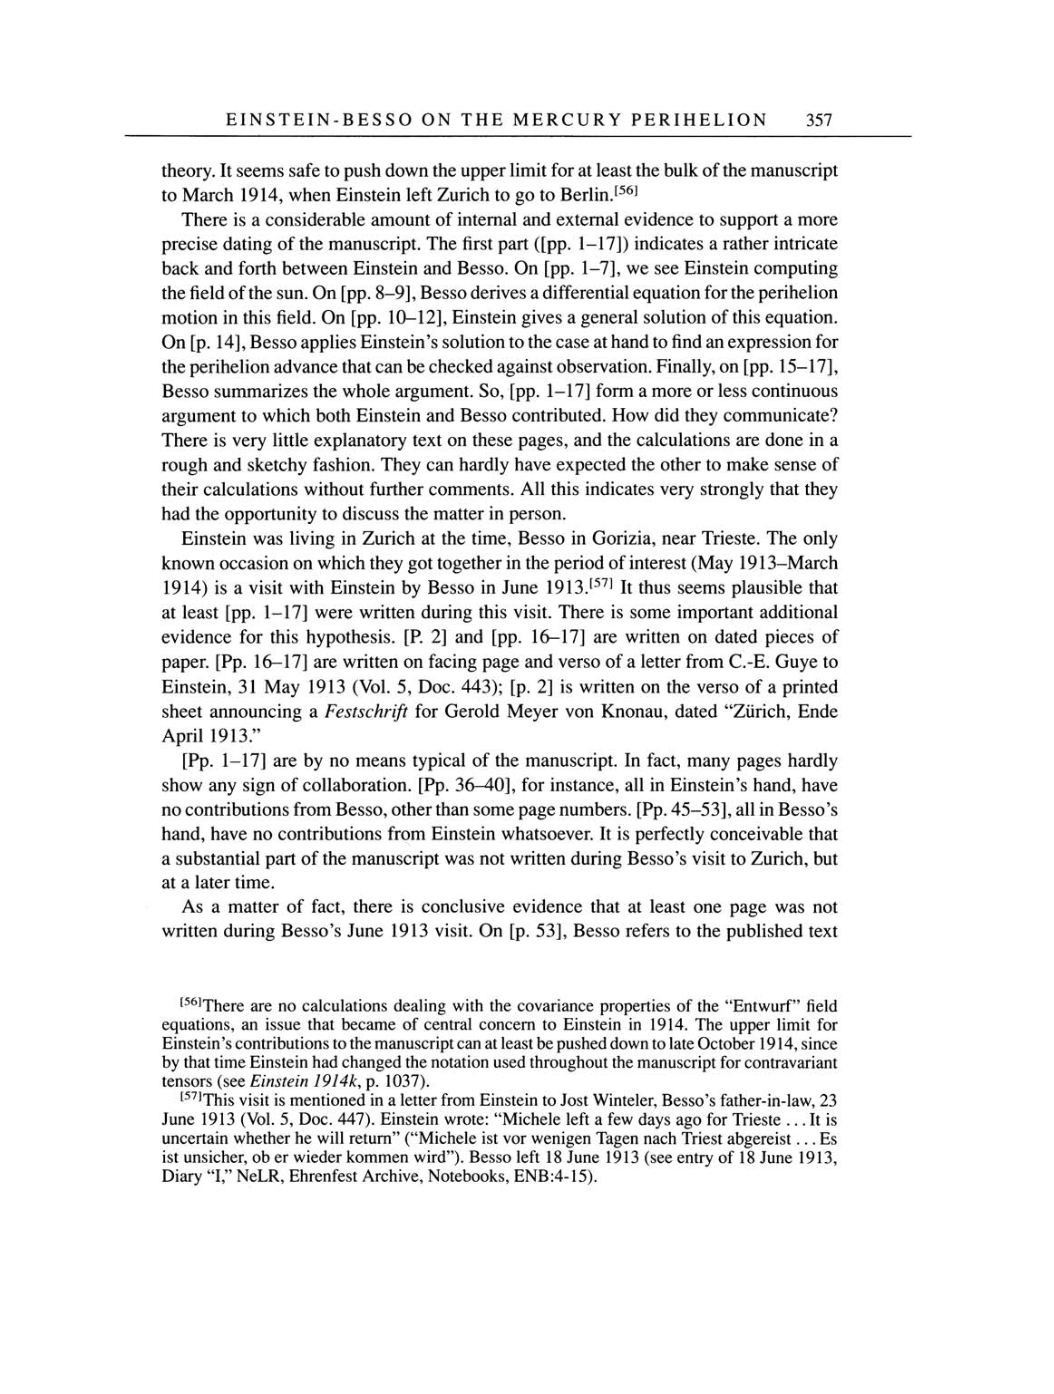 Volume 4: The Swiss Years: Writings 1912-1914 page 357